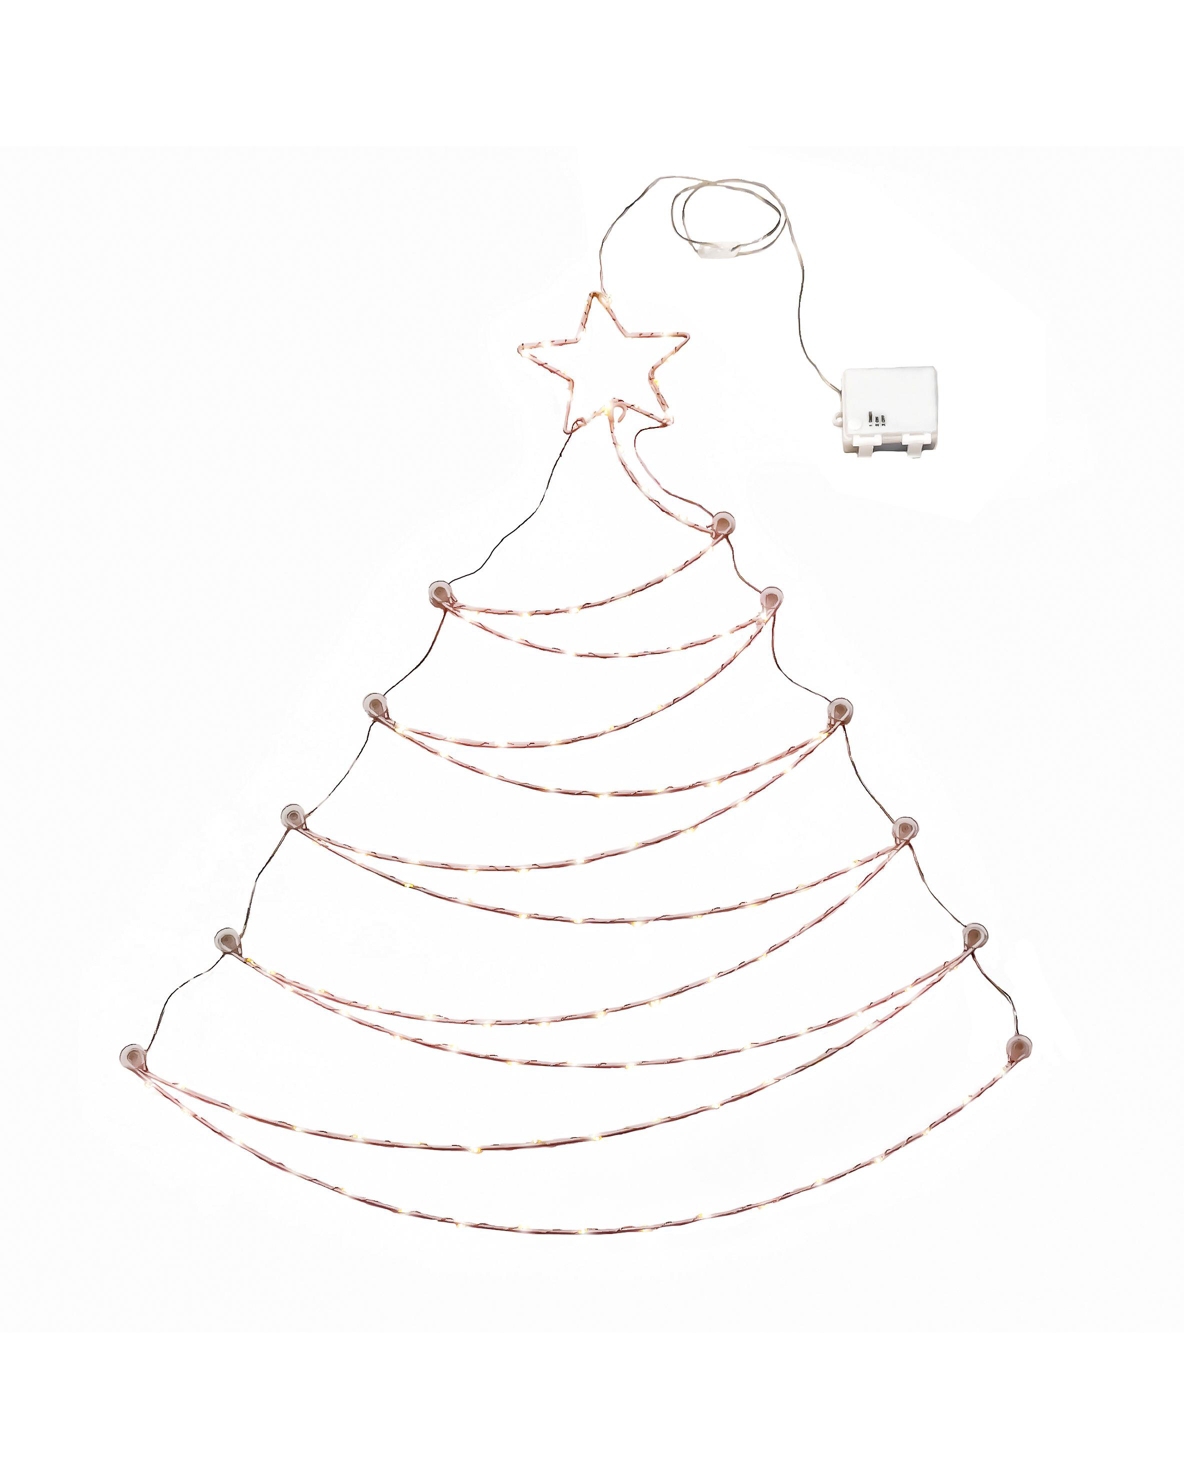 37" Pre-Lit Hanging Metal Wire Tree Decoration - Silver-Tone